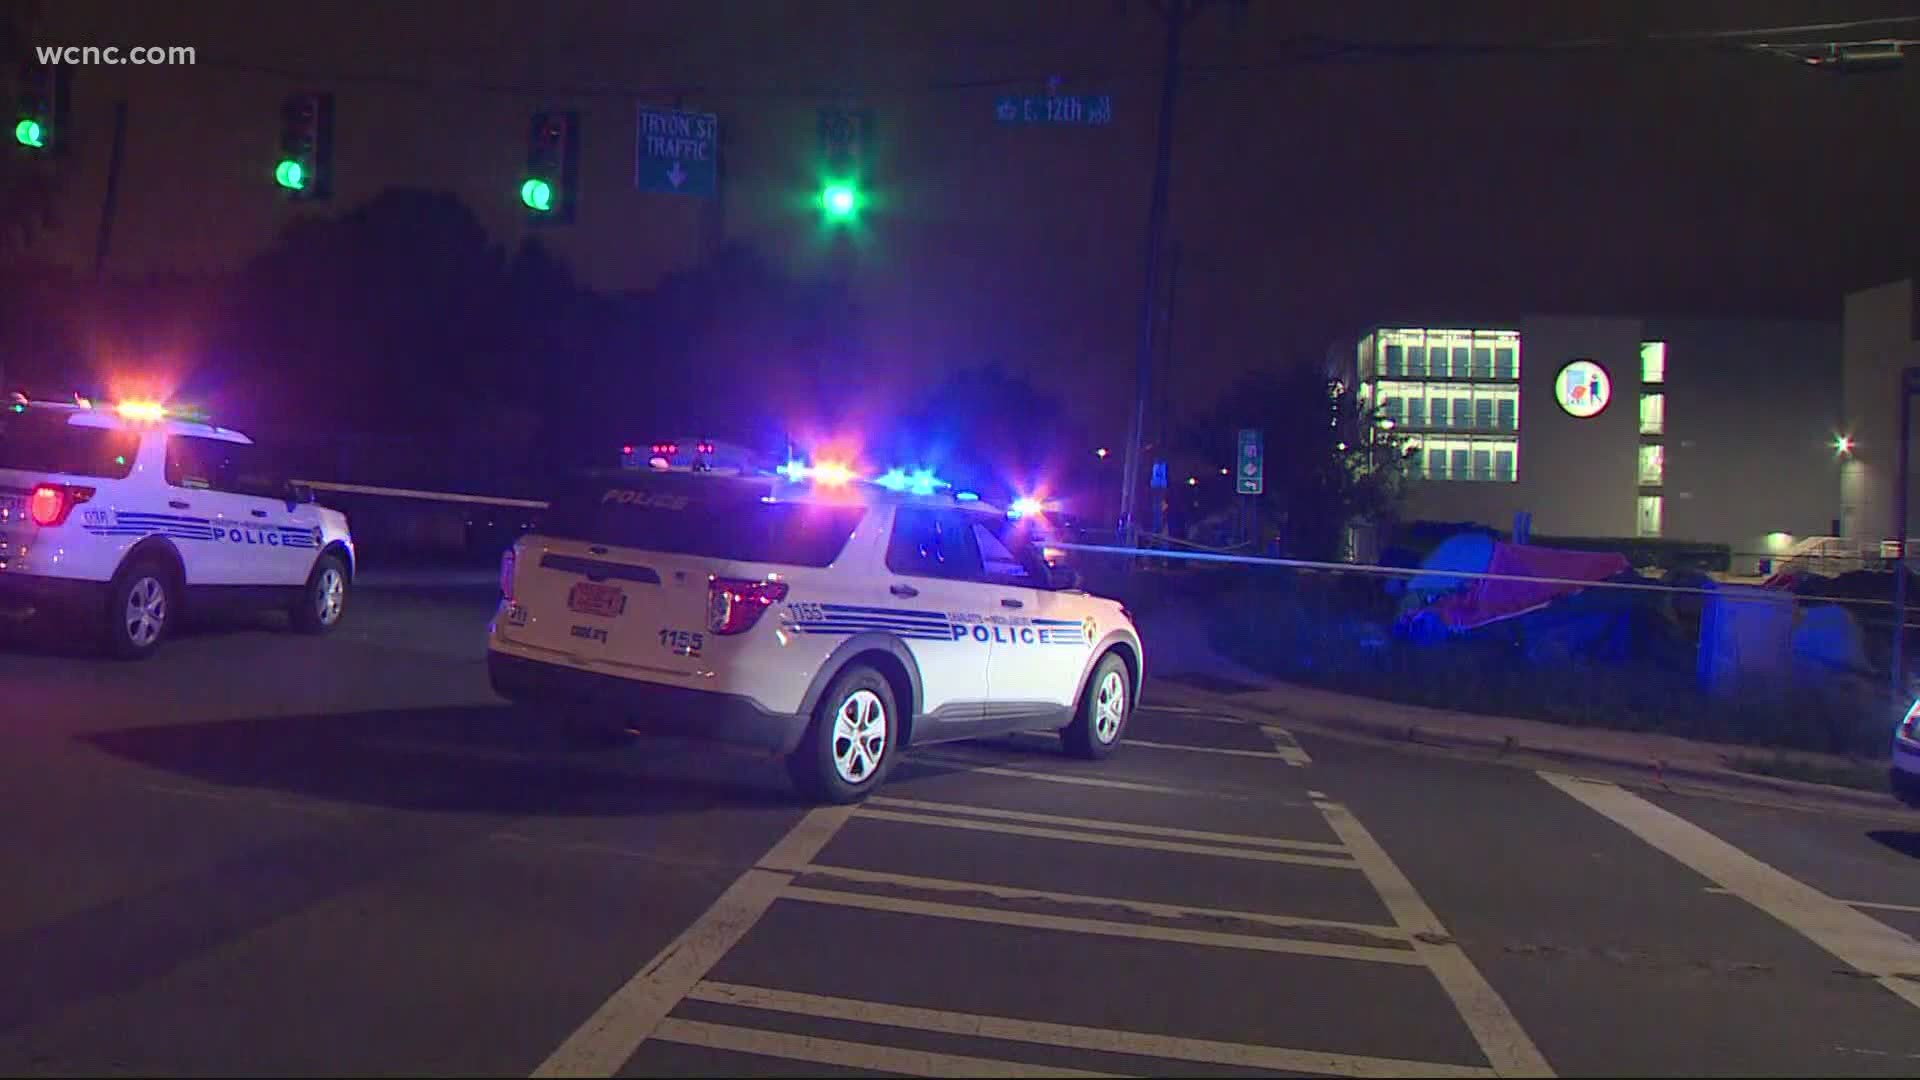 One person was killed in a shooting in uptown Charlotte early Friday, police said. No arrests have been made.